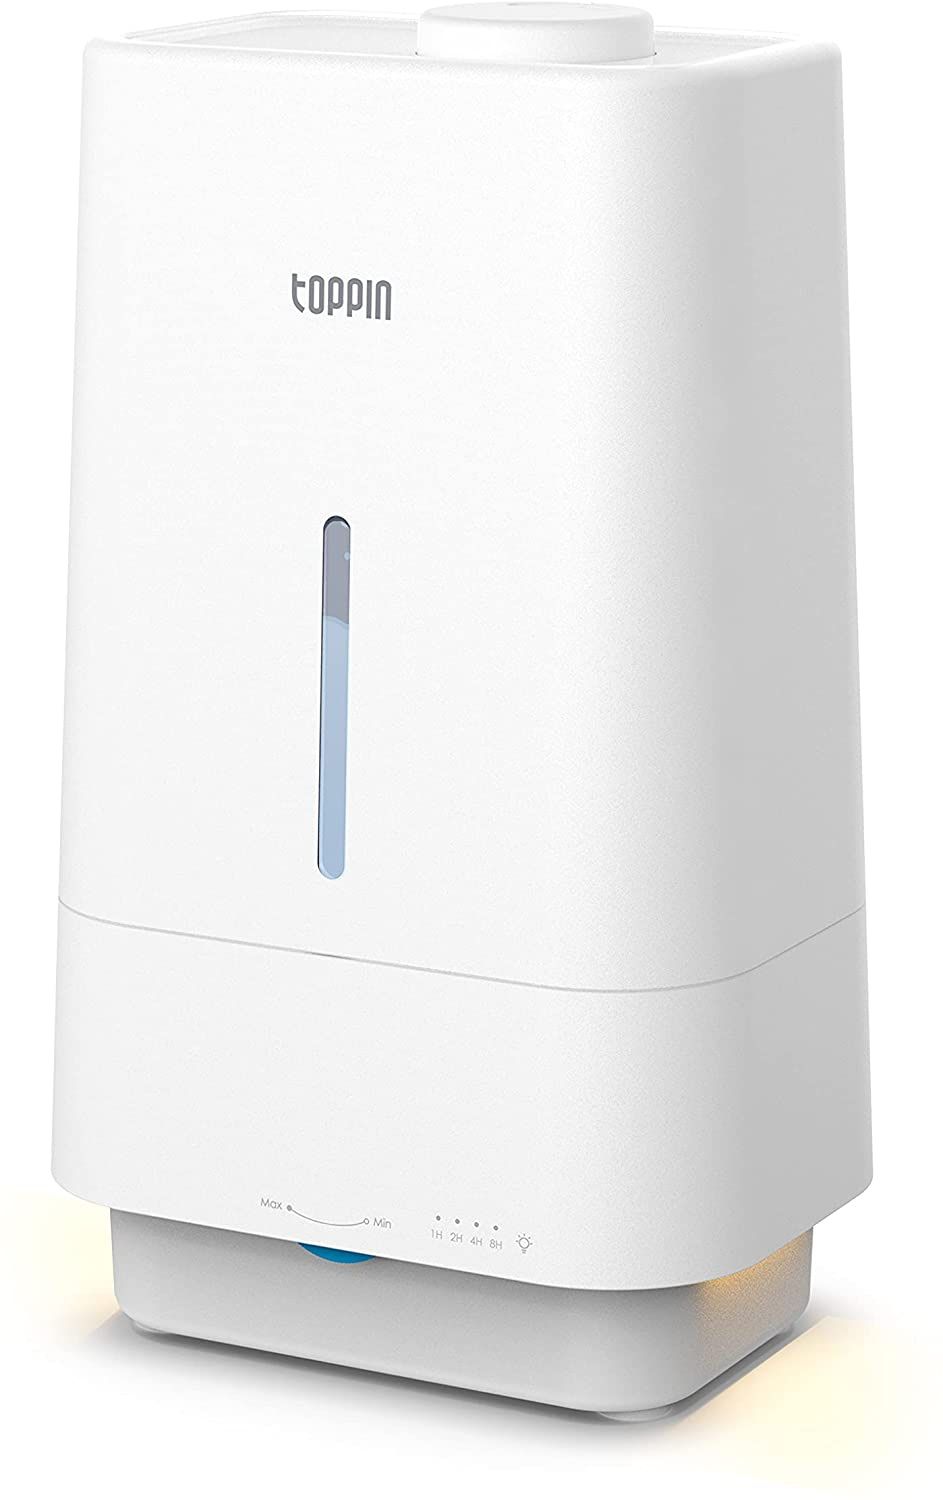 Humidifiers for Bedroom with Essential Oils - Top Fill Cool Mist Humidifiers - 4.5L Super Quiet Auto Shut-off Air Humidifier with Timer & Nightlight